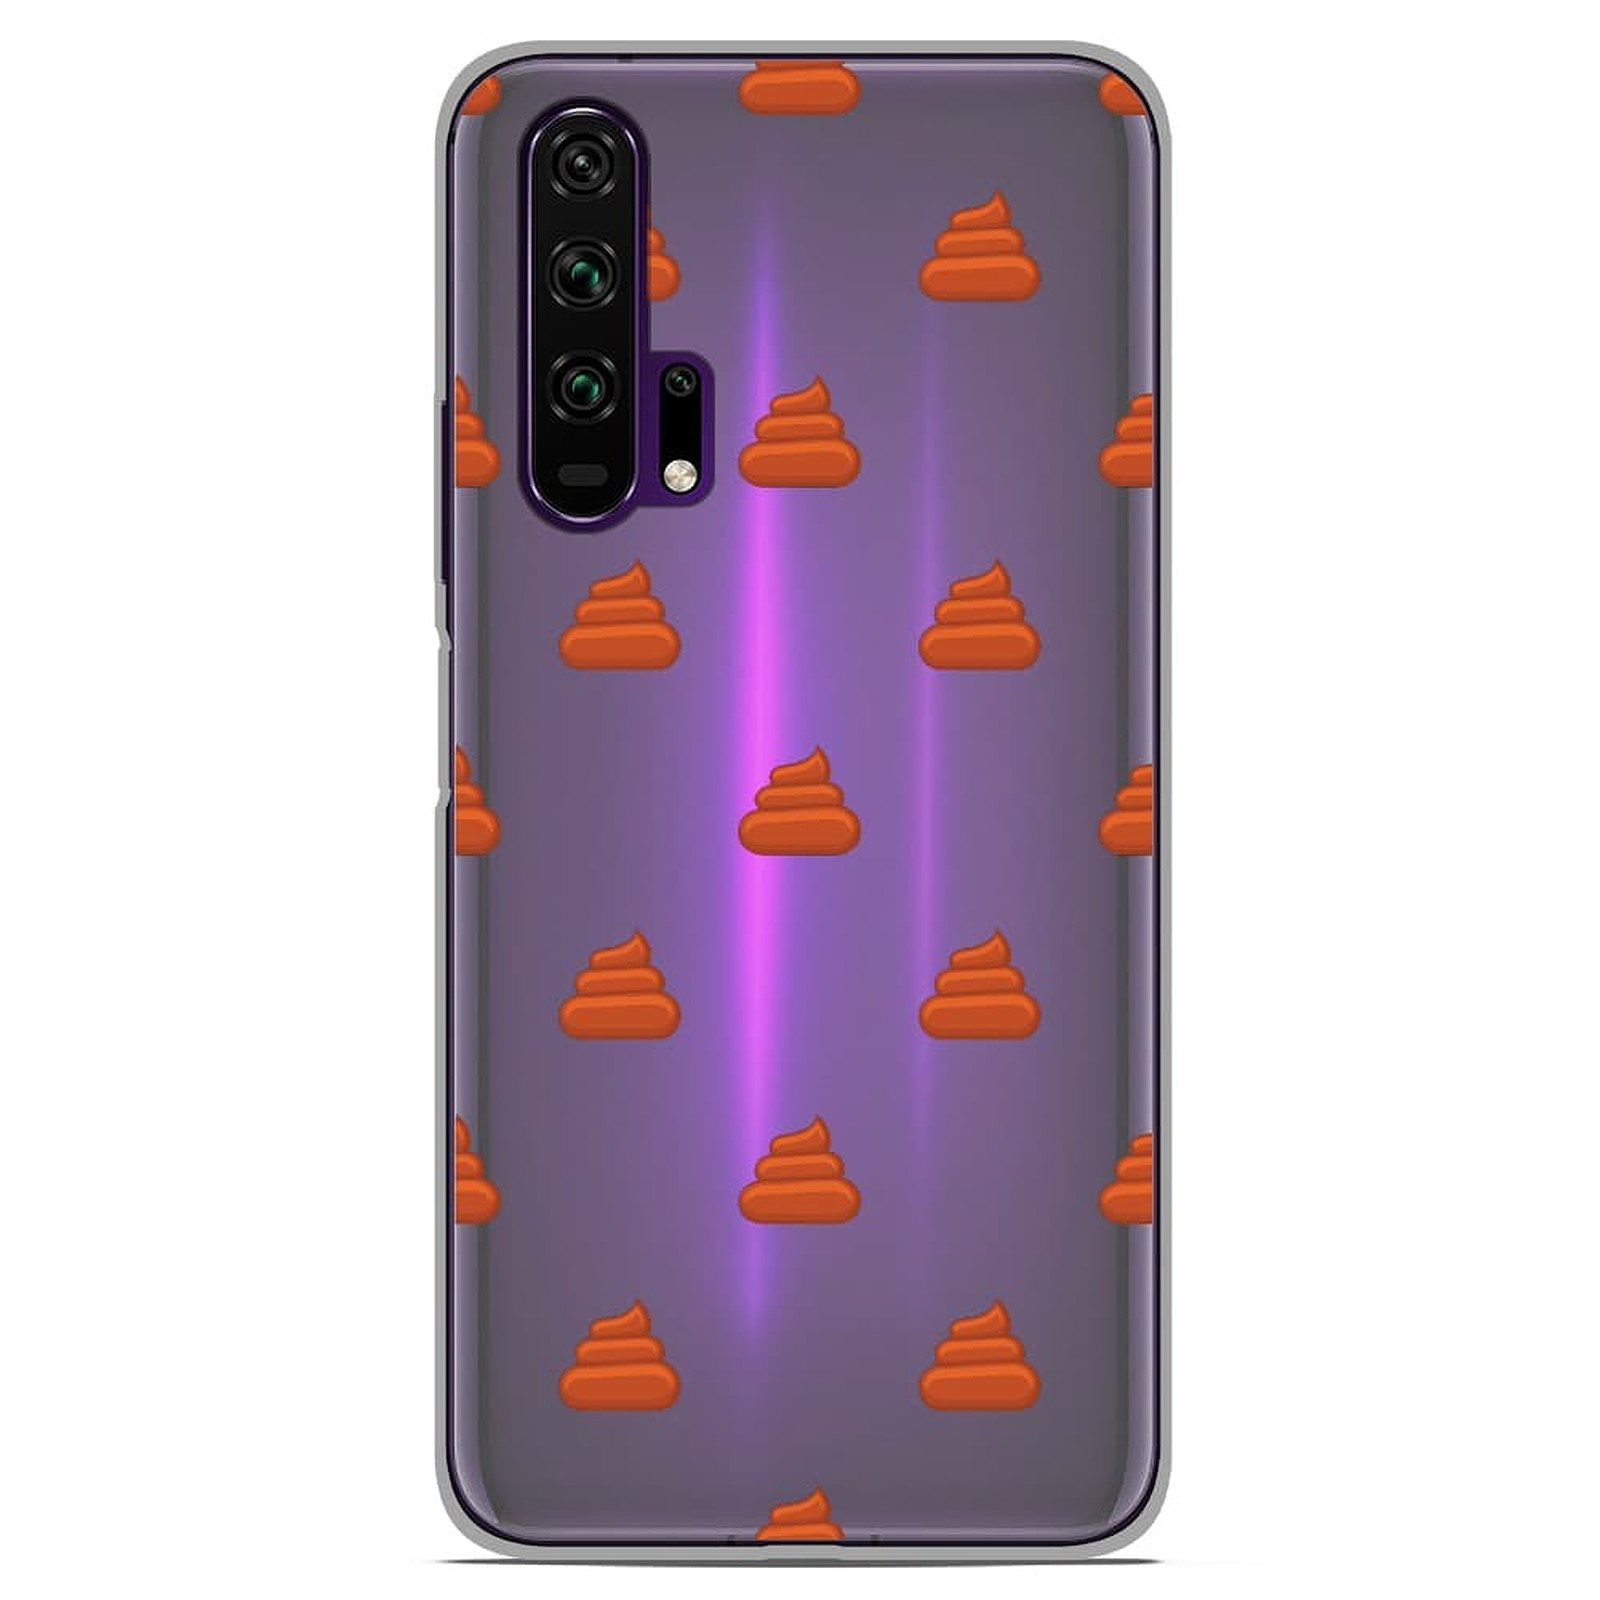 1001 Coques Coque silicone gel Huawei Honor 20 Pro motif Caca - Coque telephone 1001Coques